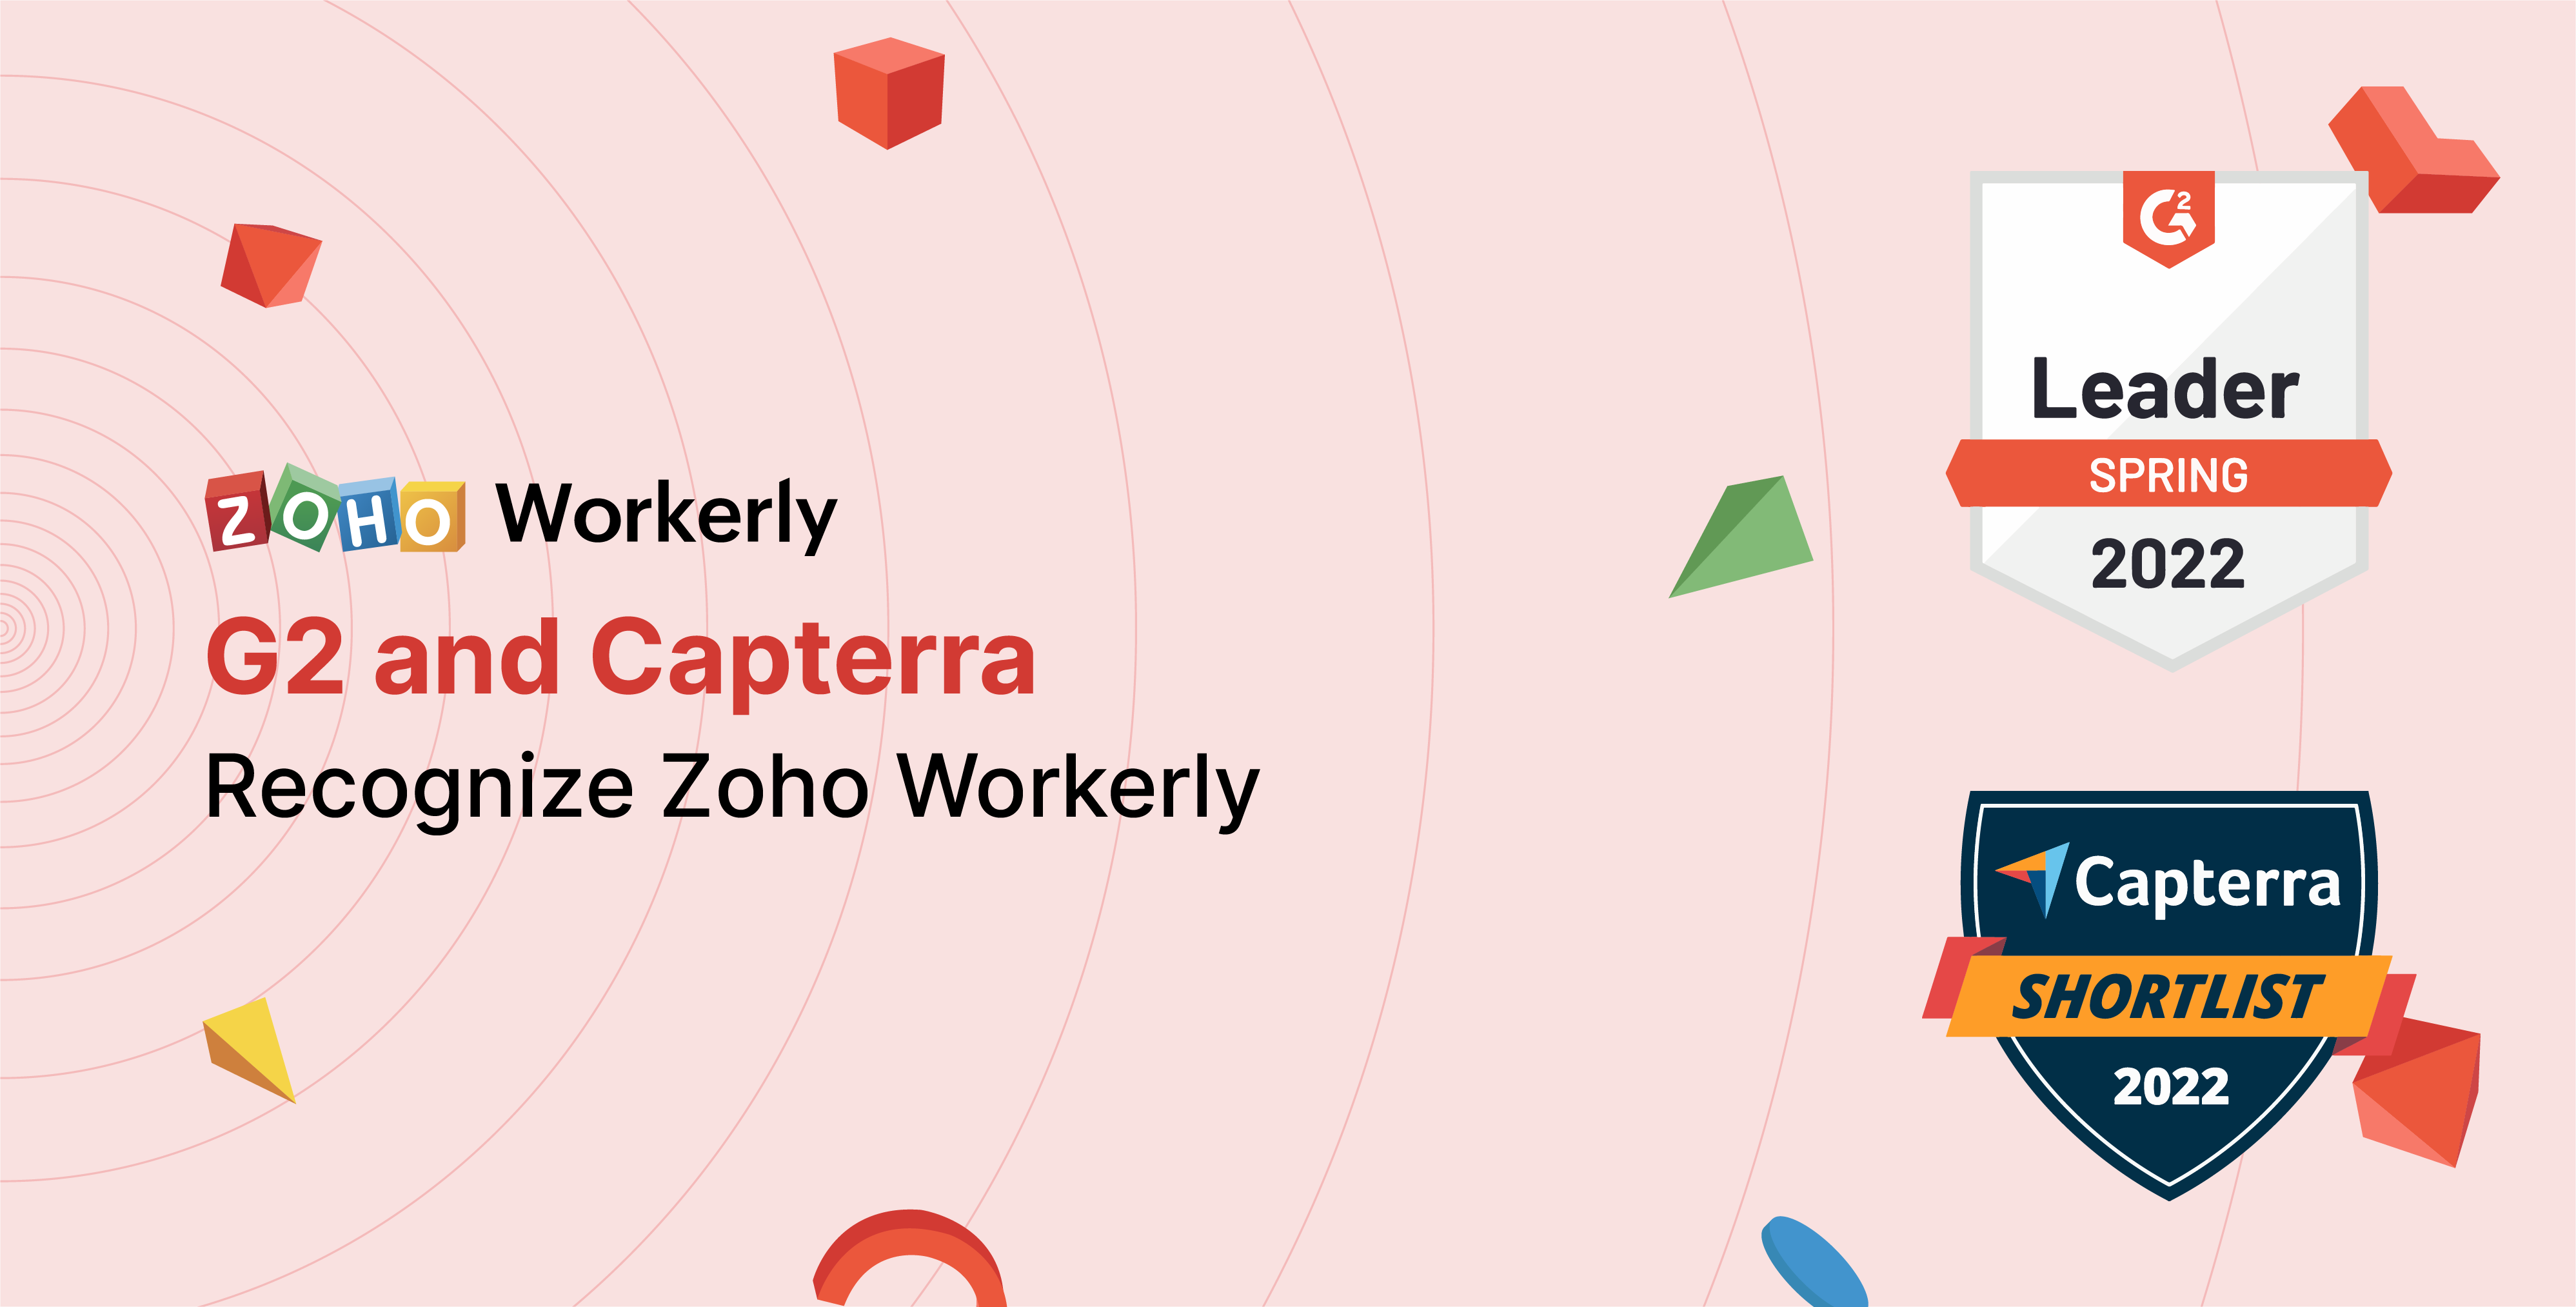 Zoho Workerly: the spring leader and emerging favorite of 2022